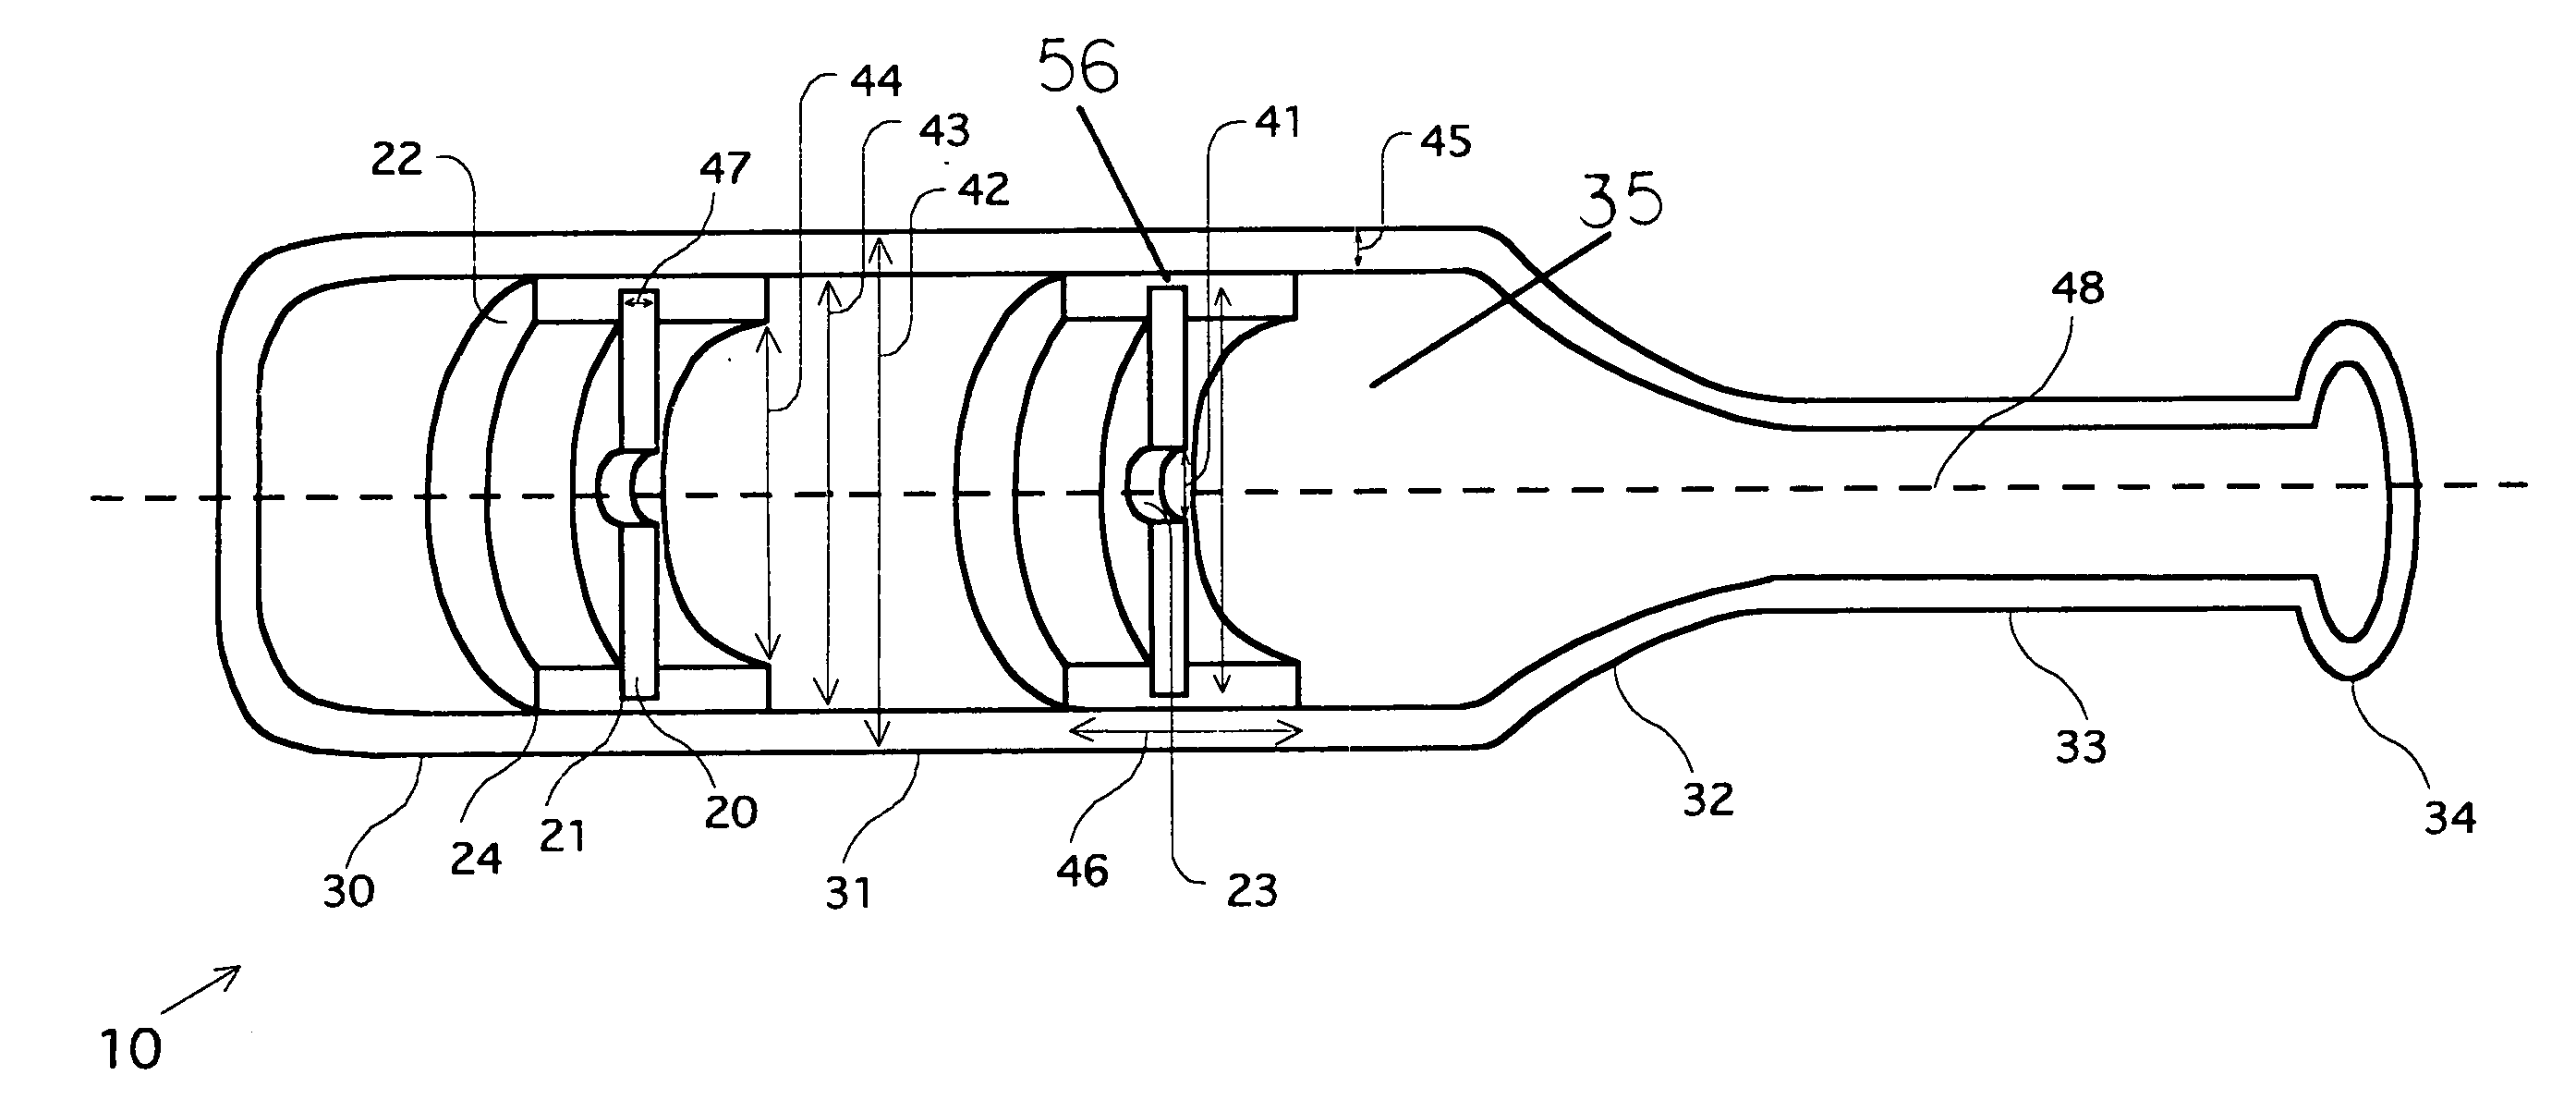 Apparatus for deterring modification of sports equipment